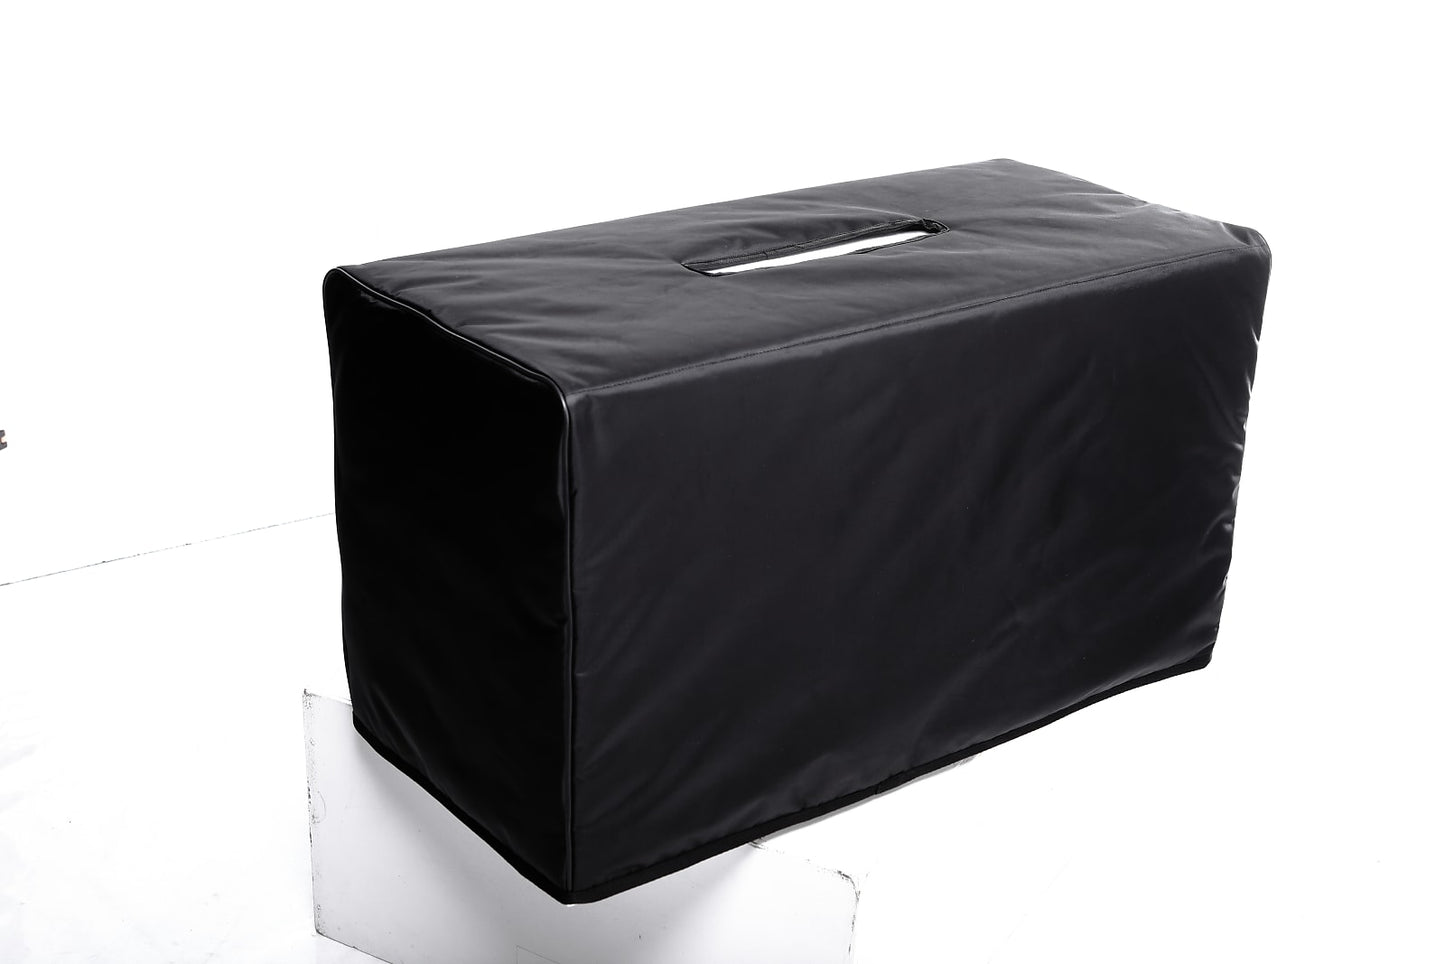 Custom padded cover for Mesa Boogie 1x12 Compact Body Extension Cab